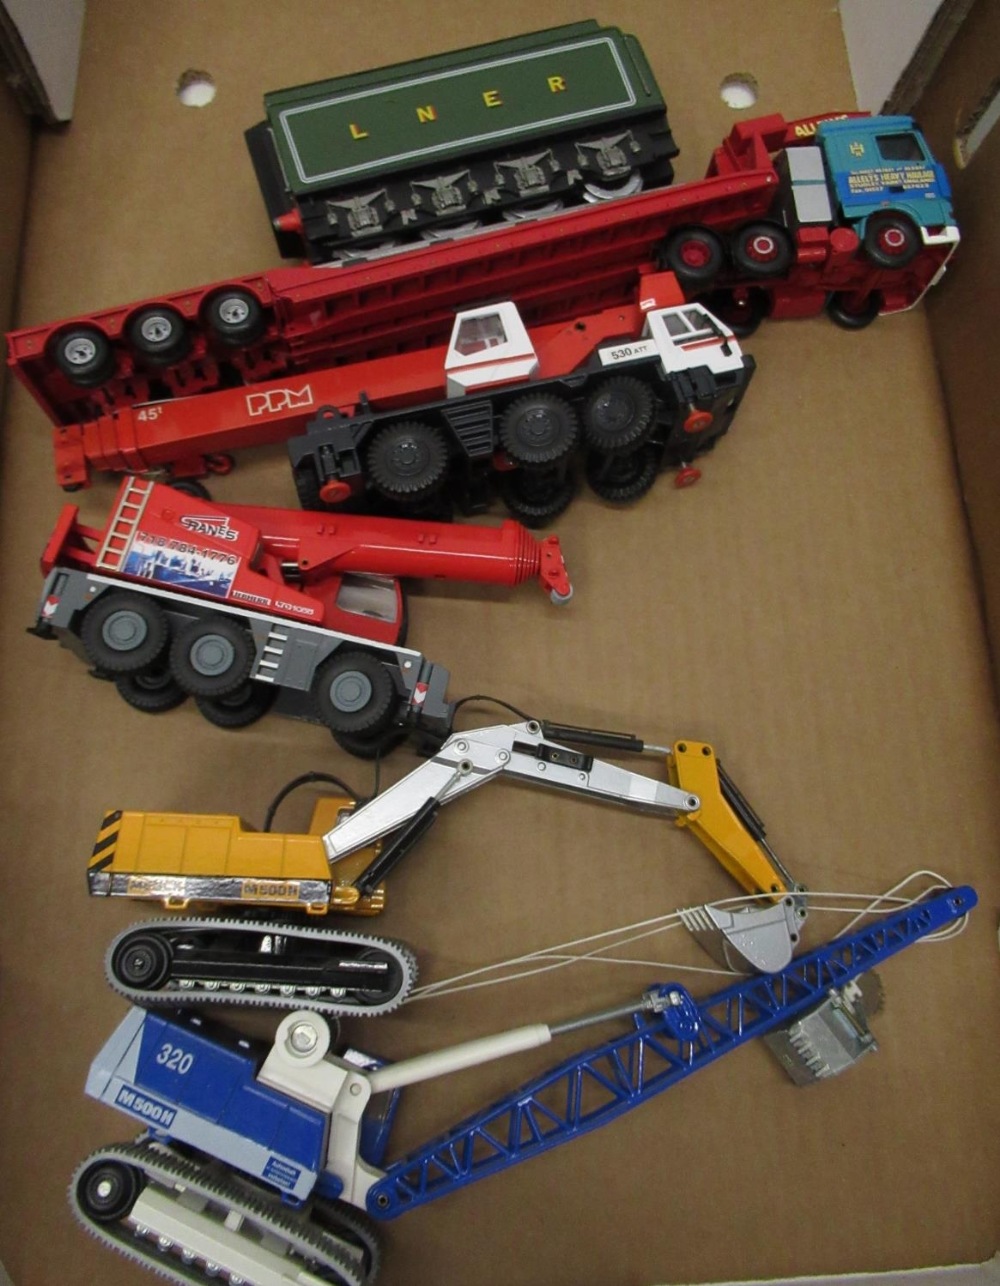 Unboxed die cast vehicles and cranes incl. Corgi Alleys, others incl. Seku cranes etc (8) - Image 2 of 3